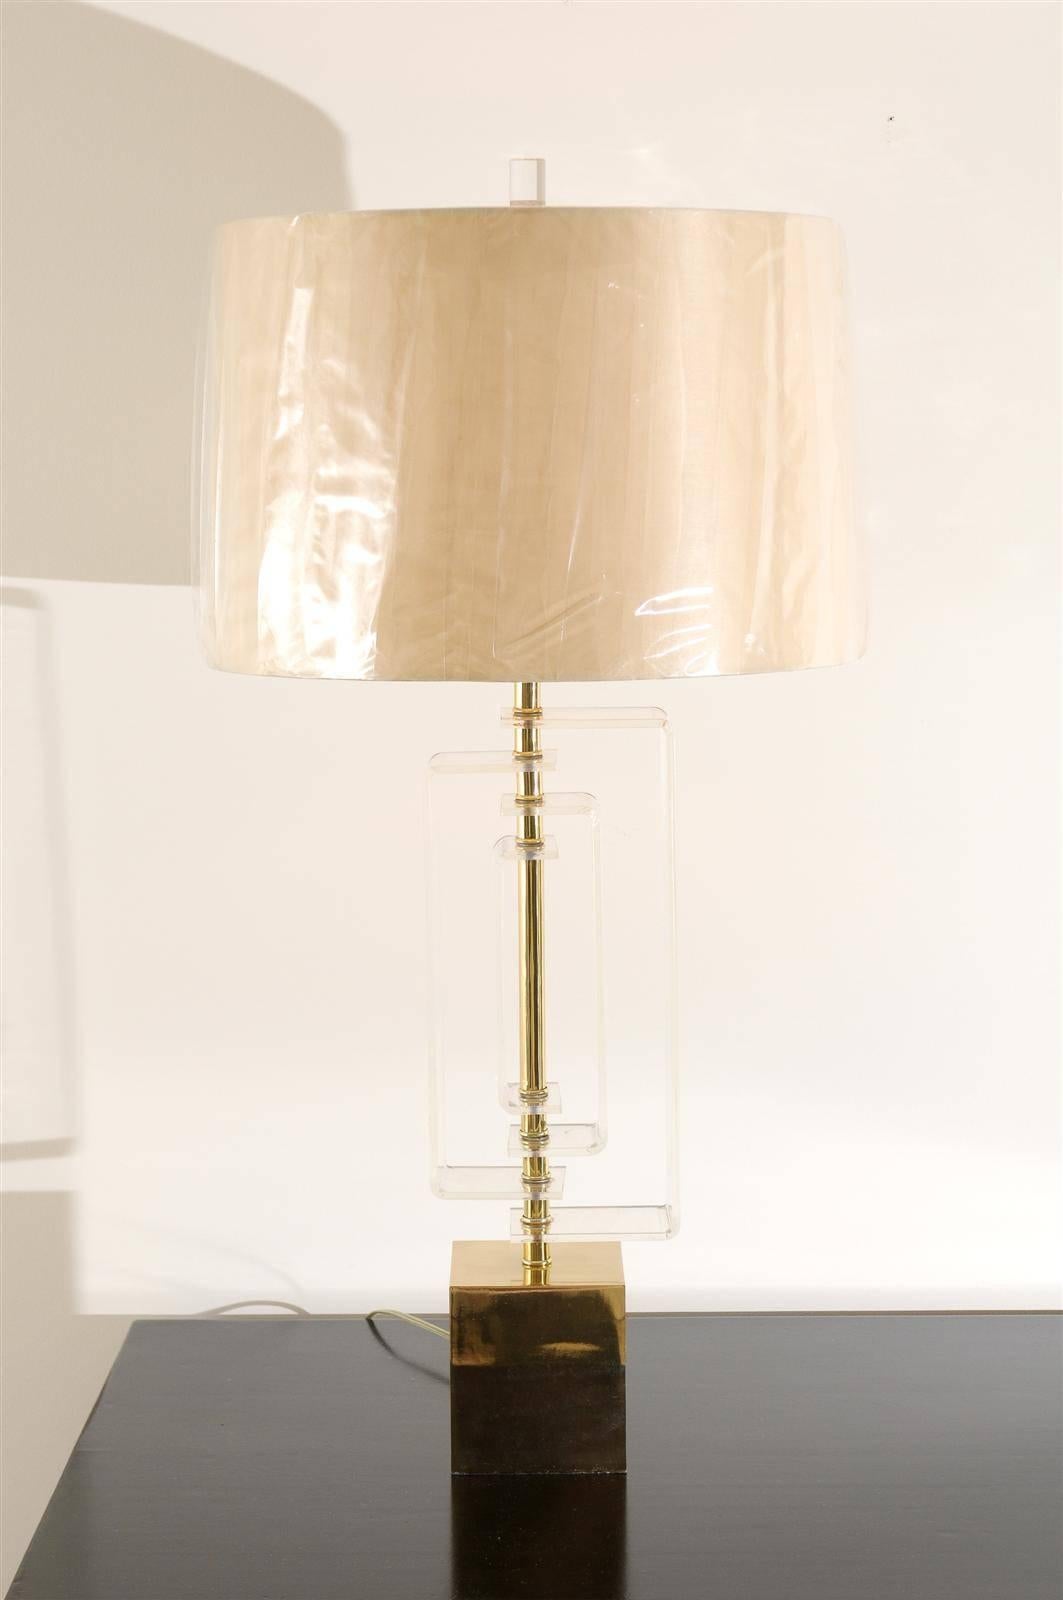 A fabulous pair of large-scale Lucite and brass lamps by Laurel, circa 1970. Individual pieces of Lucite forming a geometric motif, on a cast brass plinth with brass accents. Stunning jewelry! Excellent restored condition. All brass components have